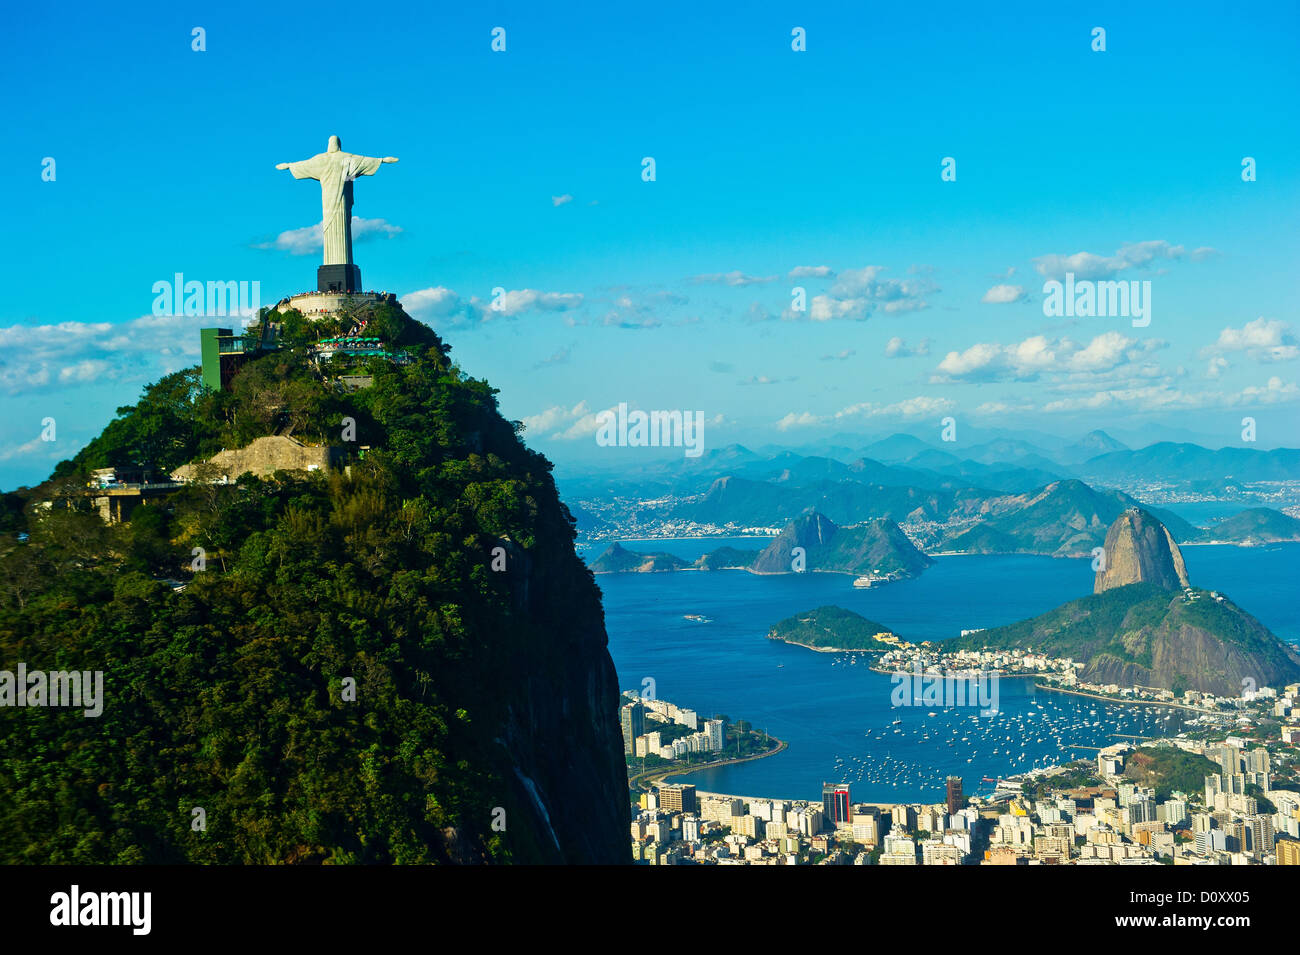 Christ the Redeemer statue overlooking Rio de Janeiro and Sugarloaf Mountain, Brazil Stock Photo